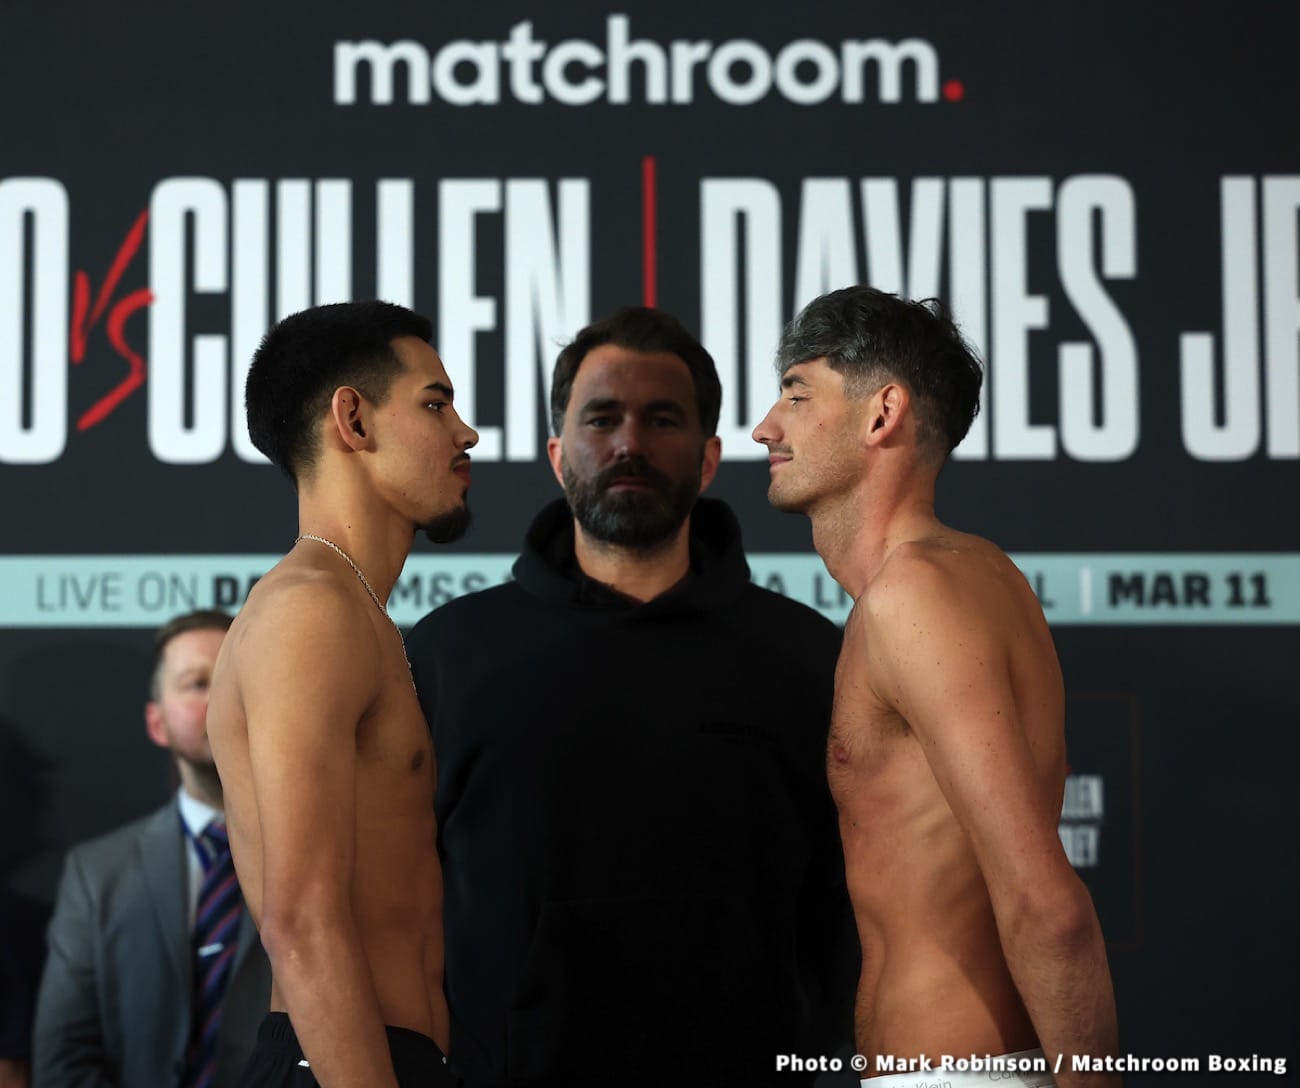 Image: Pacheco vs Cullen on March 11 in Liverpool, UK